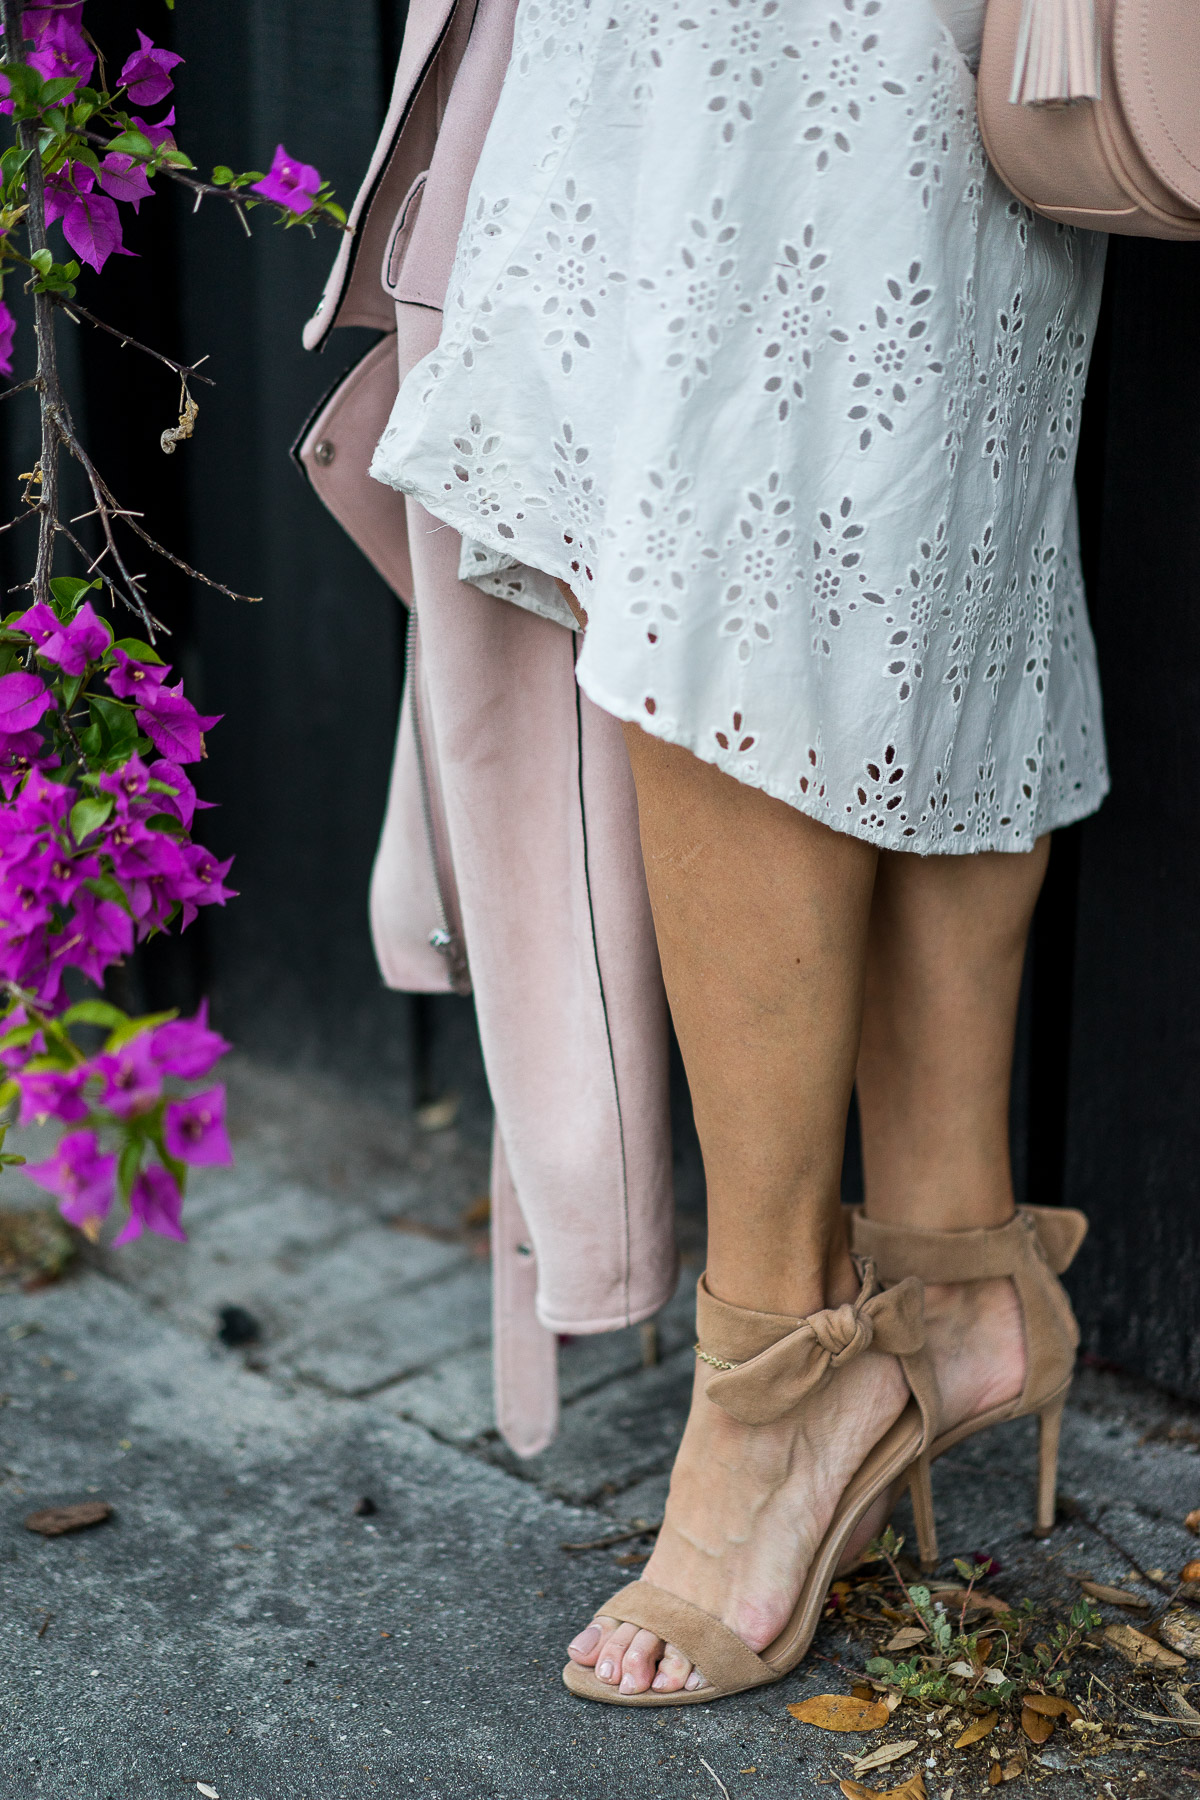 Banana Republic bow sandals shown with Old Navy eyelet midi dress by A Glam Lifestyle blogger Amanda to #SayHi to Spring